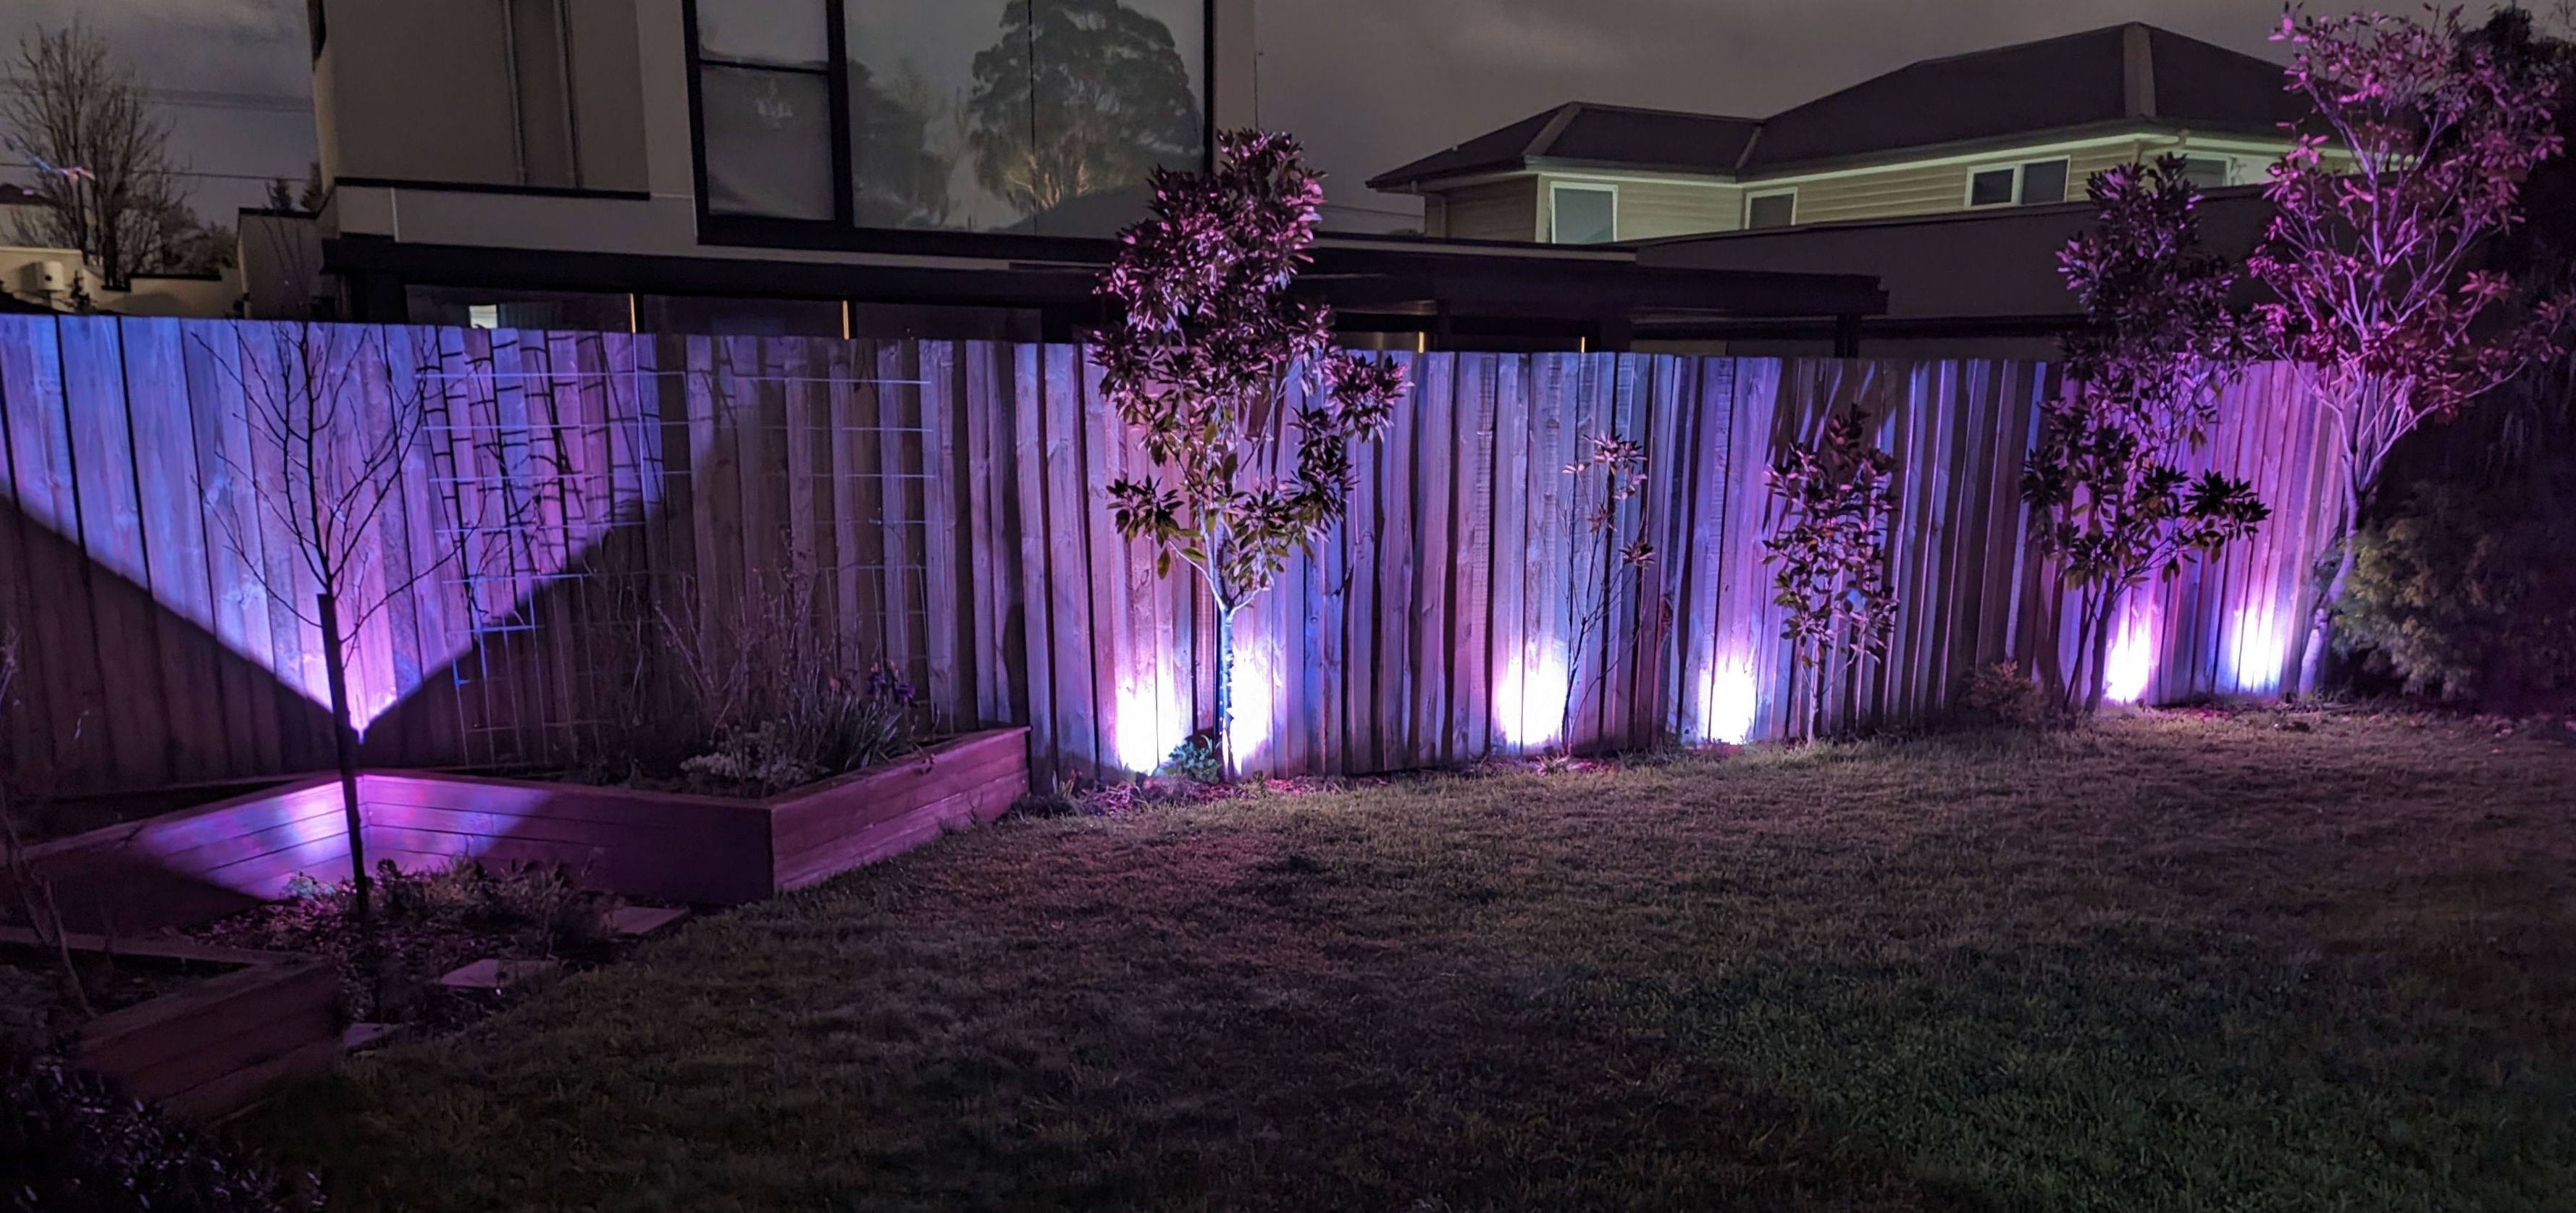 Garden lighting installation and cable c... | Bunnings Workshop community